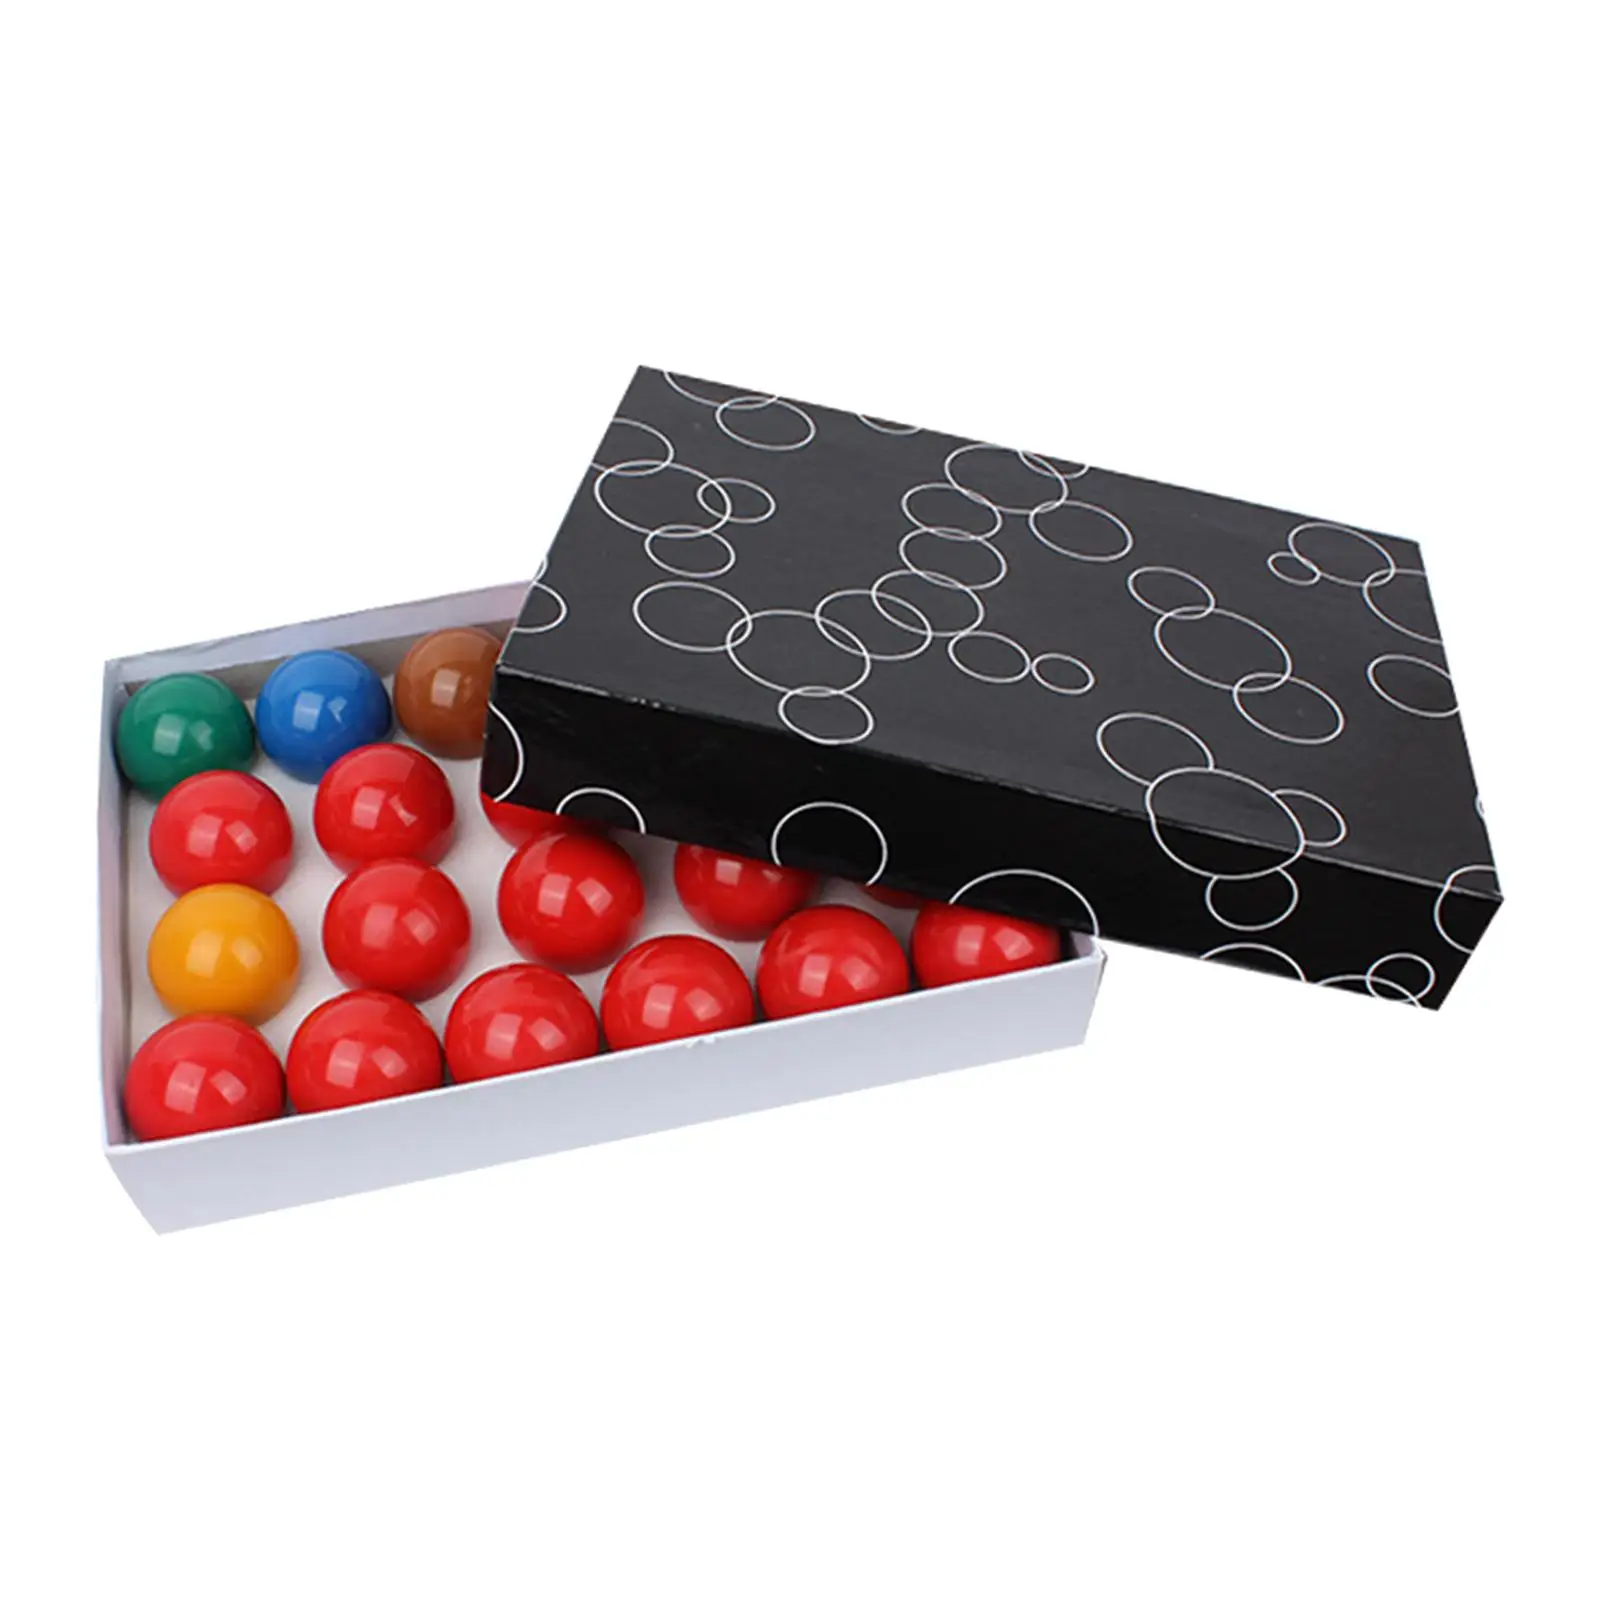 22 Pieces Professional Billiard Balls 50.8mm Resin Colorful Pool Table Balls